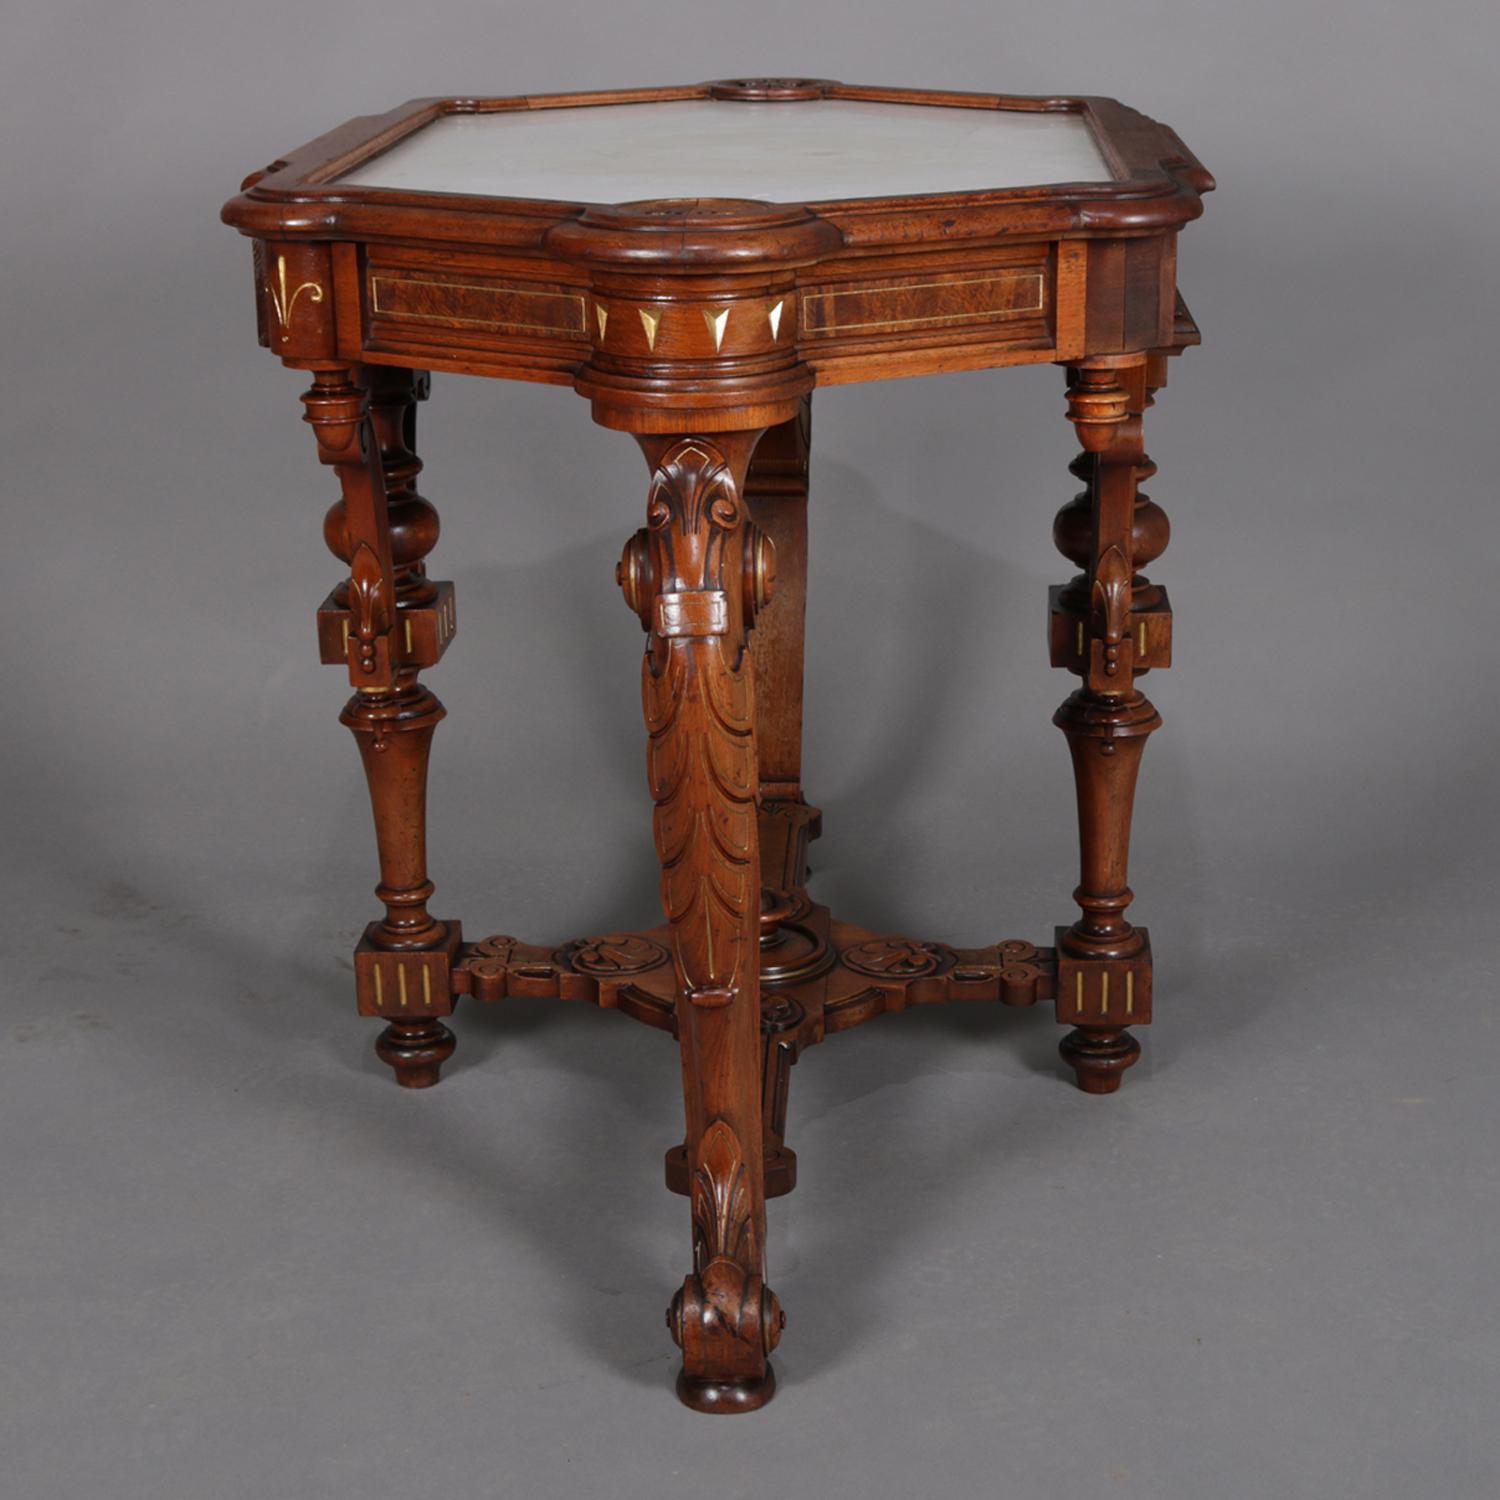 Renaissance Revival Antique Neo Greco Carved Walnut, Burl and Gilt Marble-Top Table, circa 1880